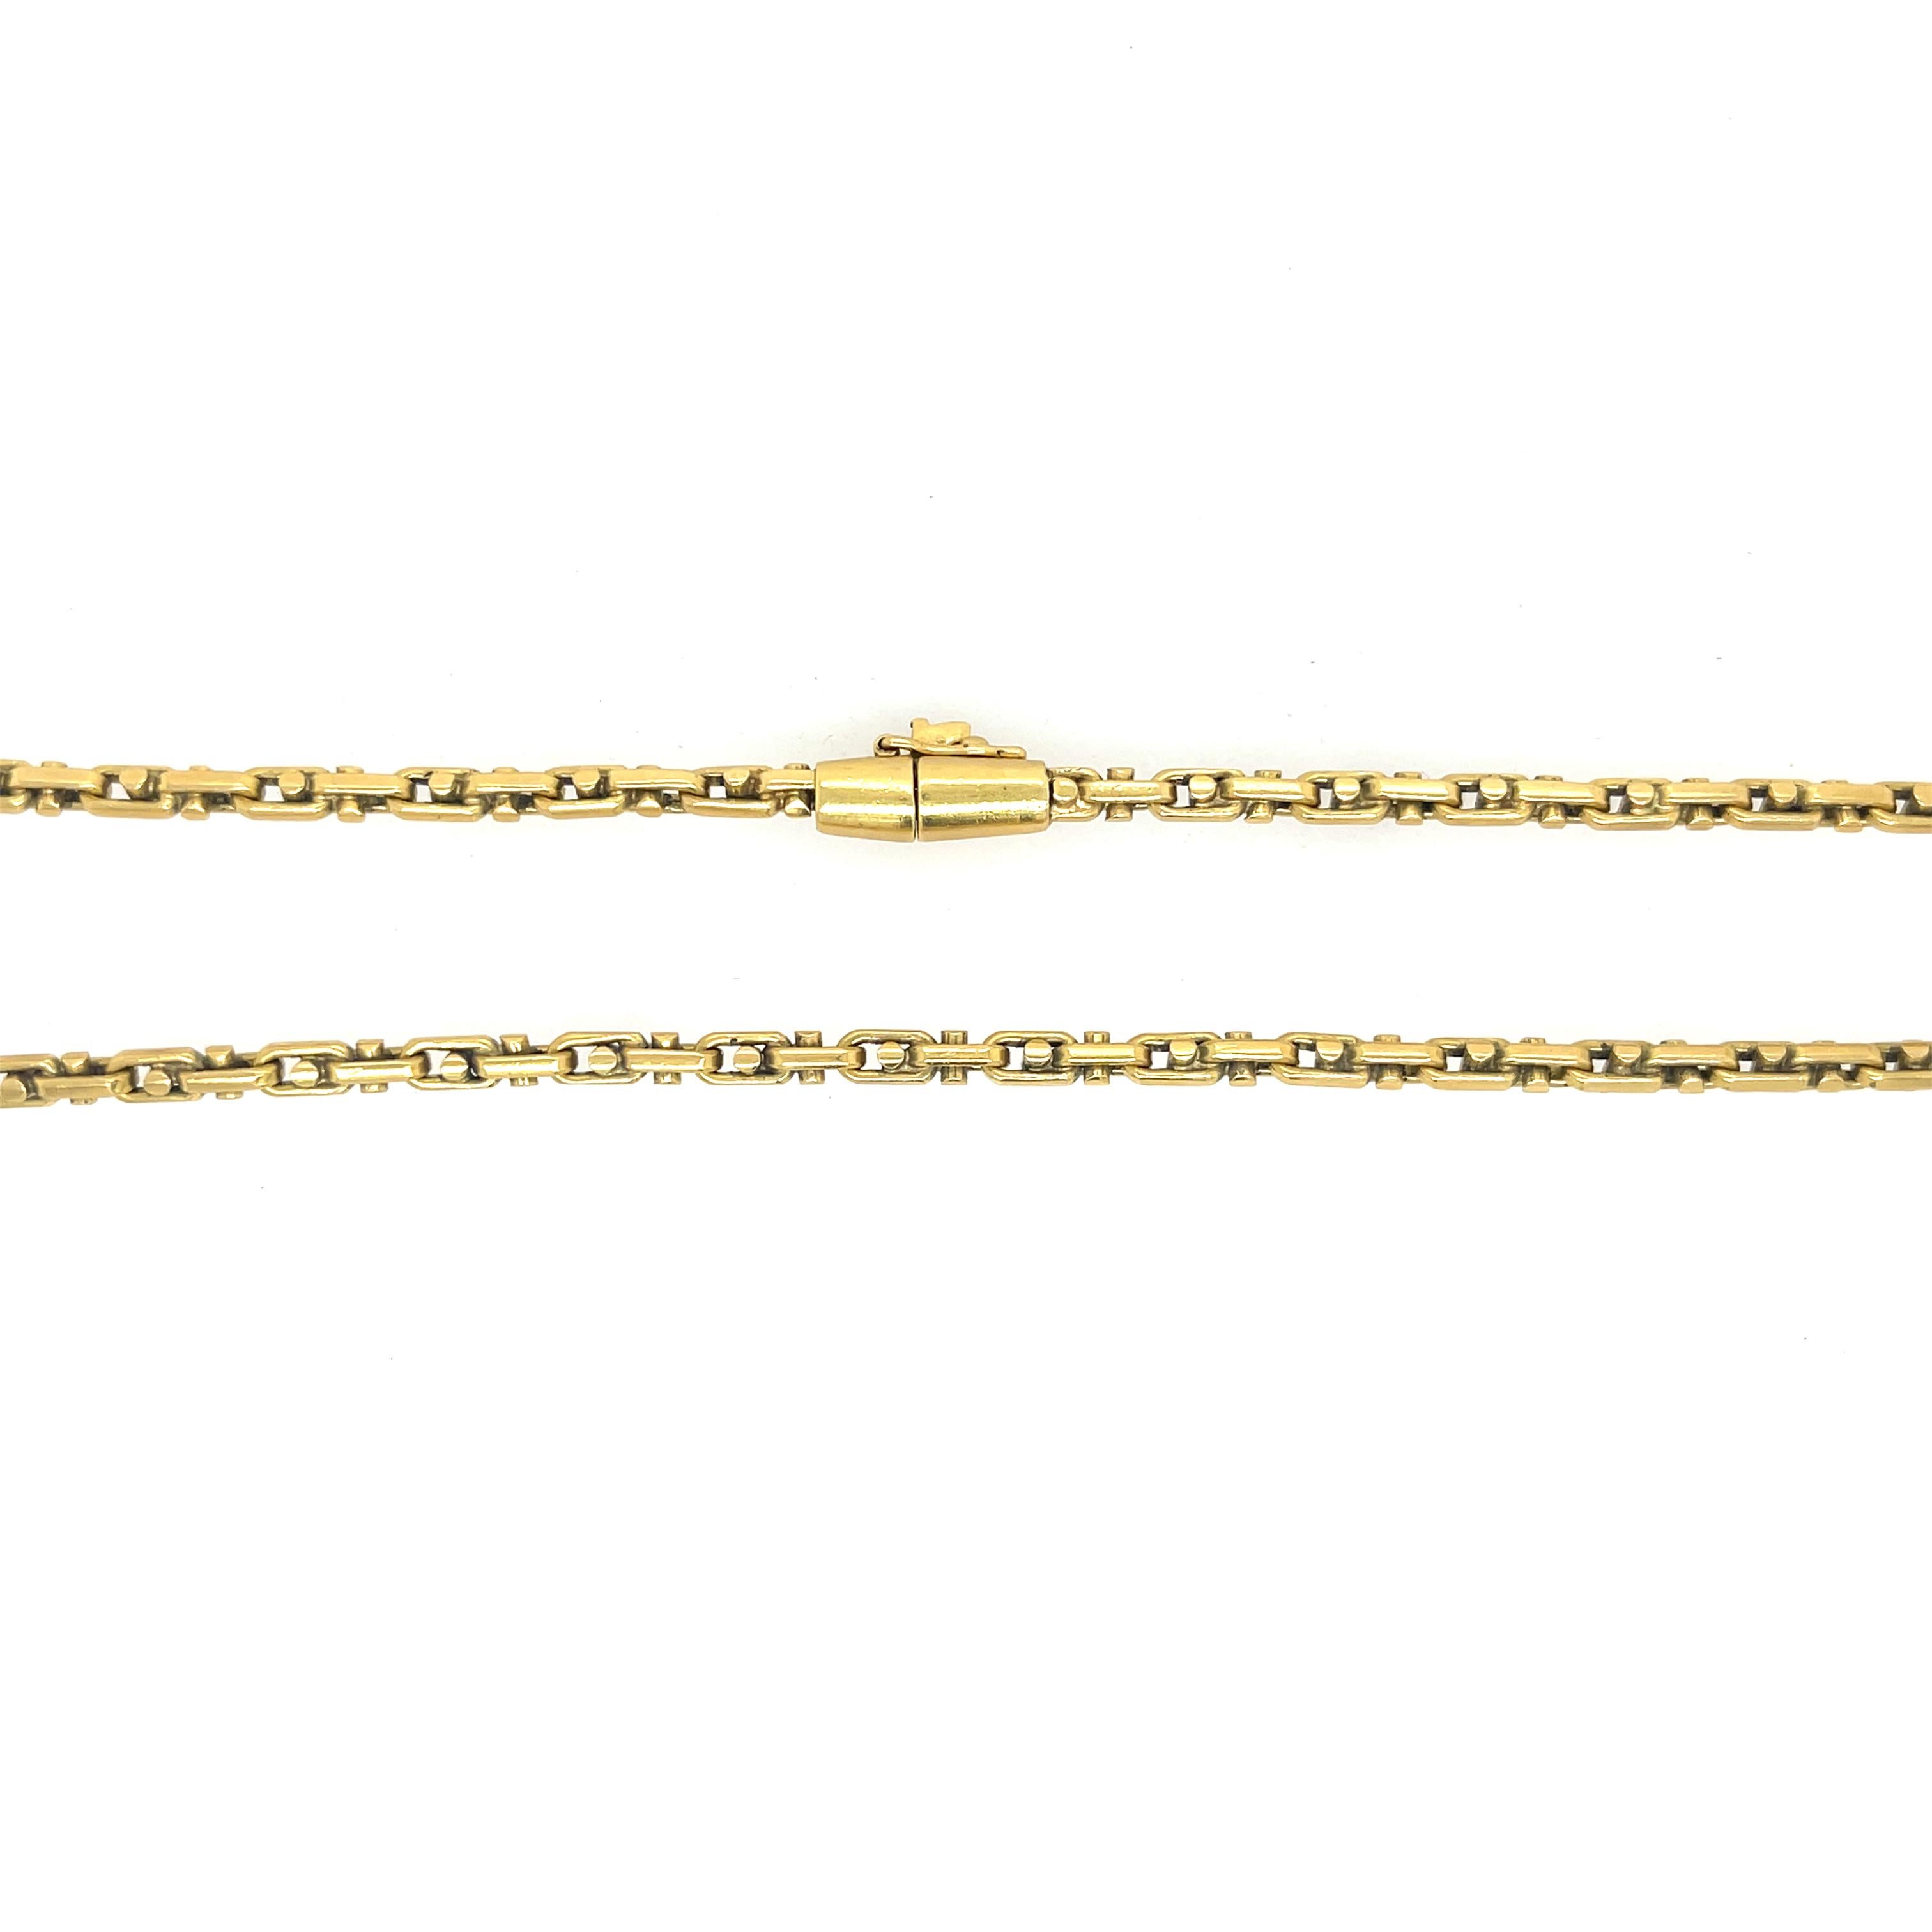 Fancy Link Chain in 18K Yellow Gold with a Barrel Style Clasp. 
27” Length
46.7 Grams
3mm wide